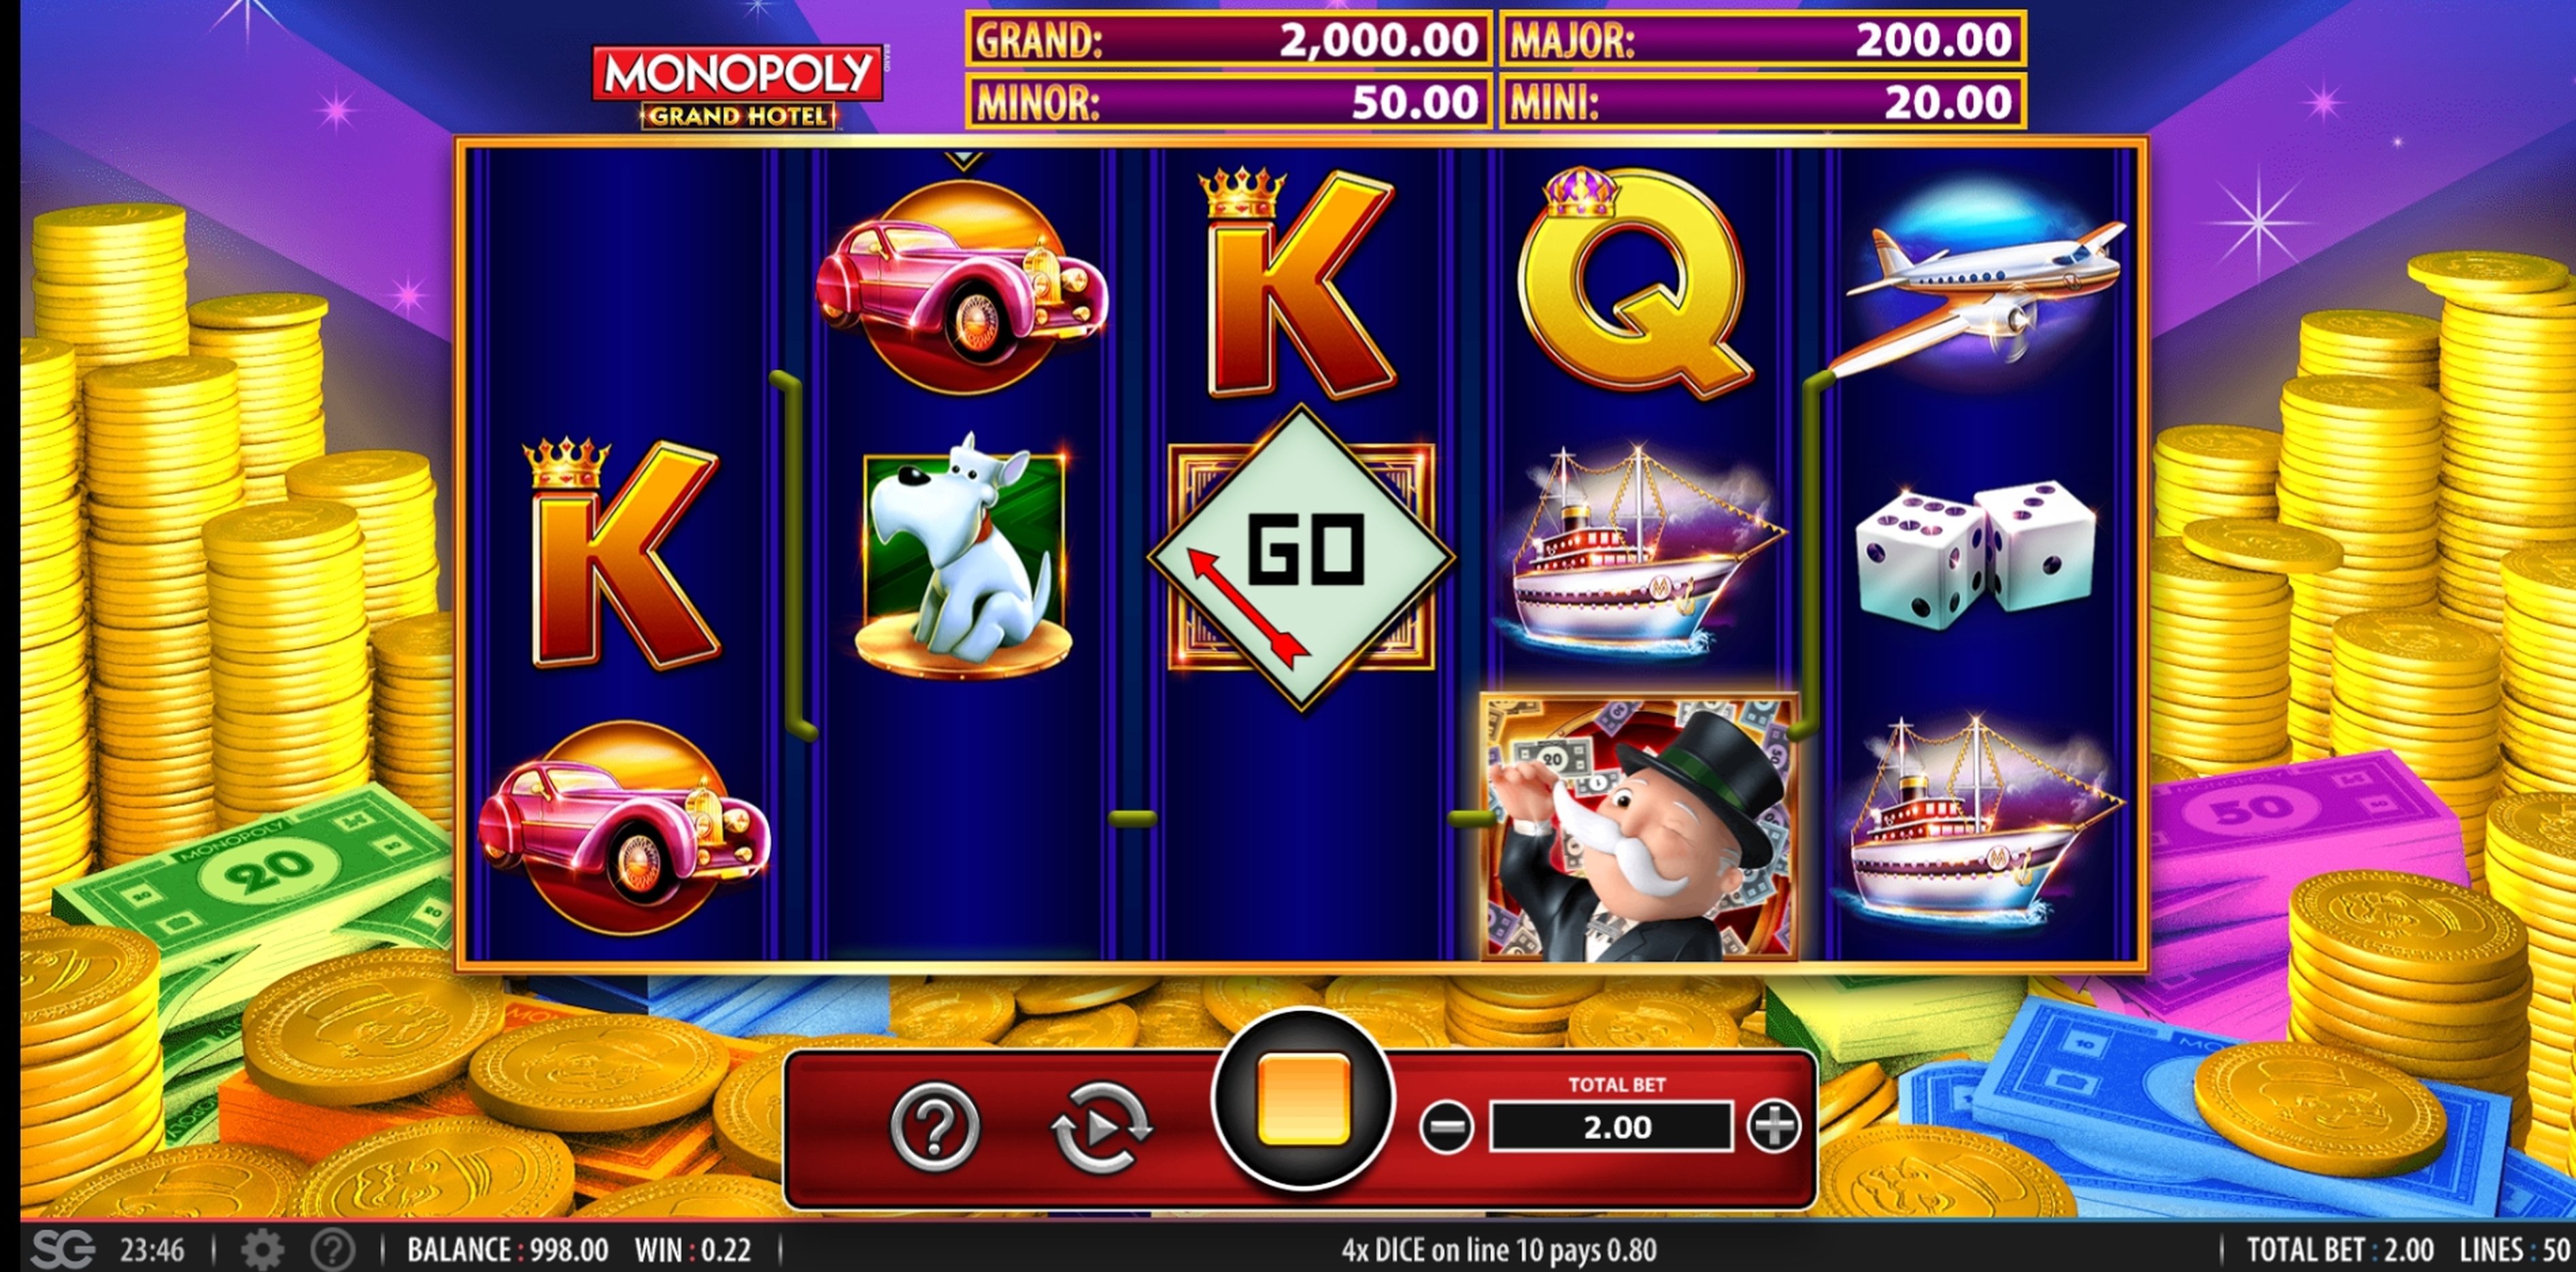 Win Money in Monopoly Grand Hotel Free Slot Game by WMS